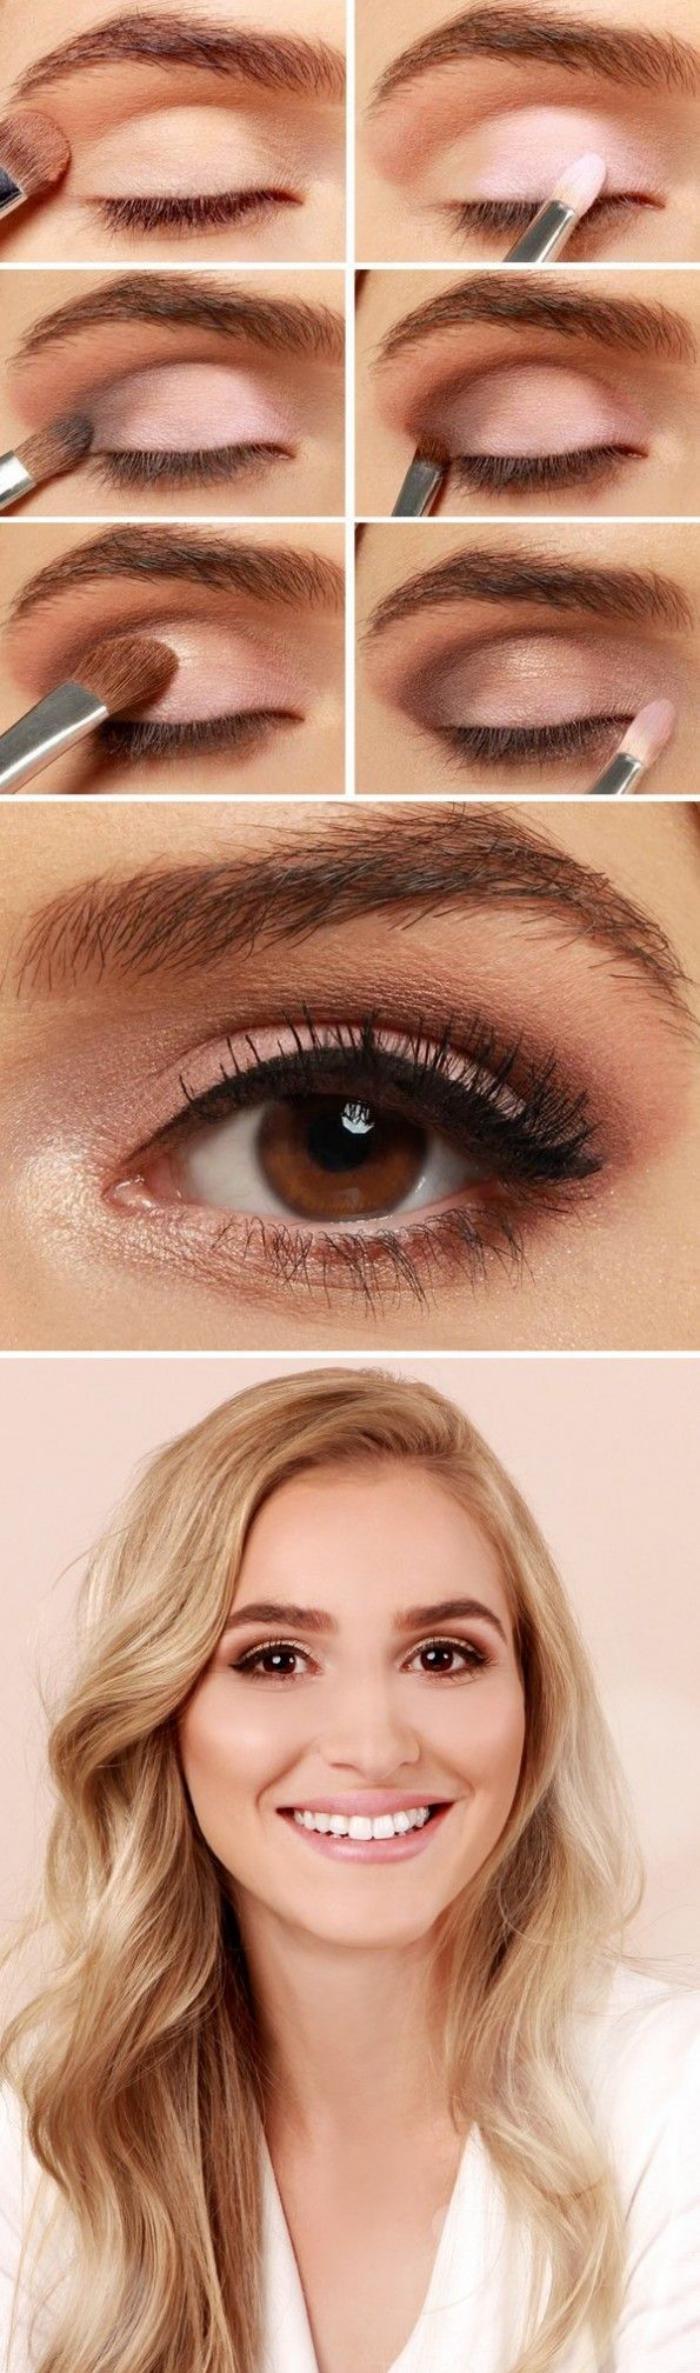 maquillage-simple-idée-maquillage-yeux-marrons